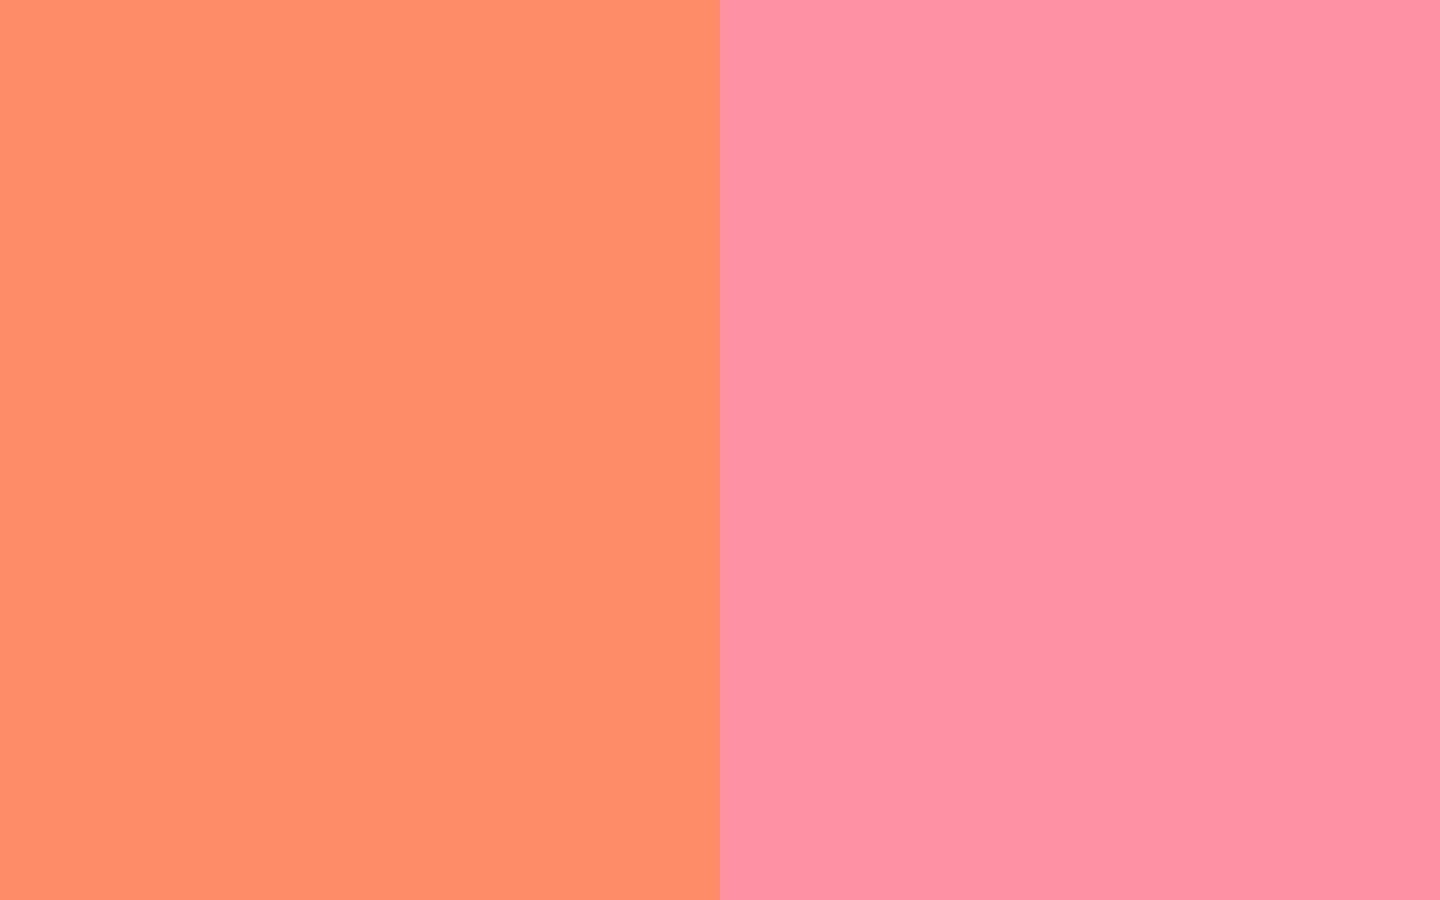 Two colors that are pink and orange - Salmon